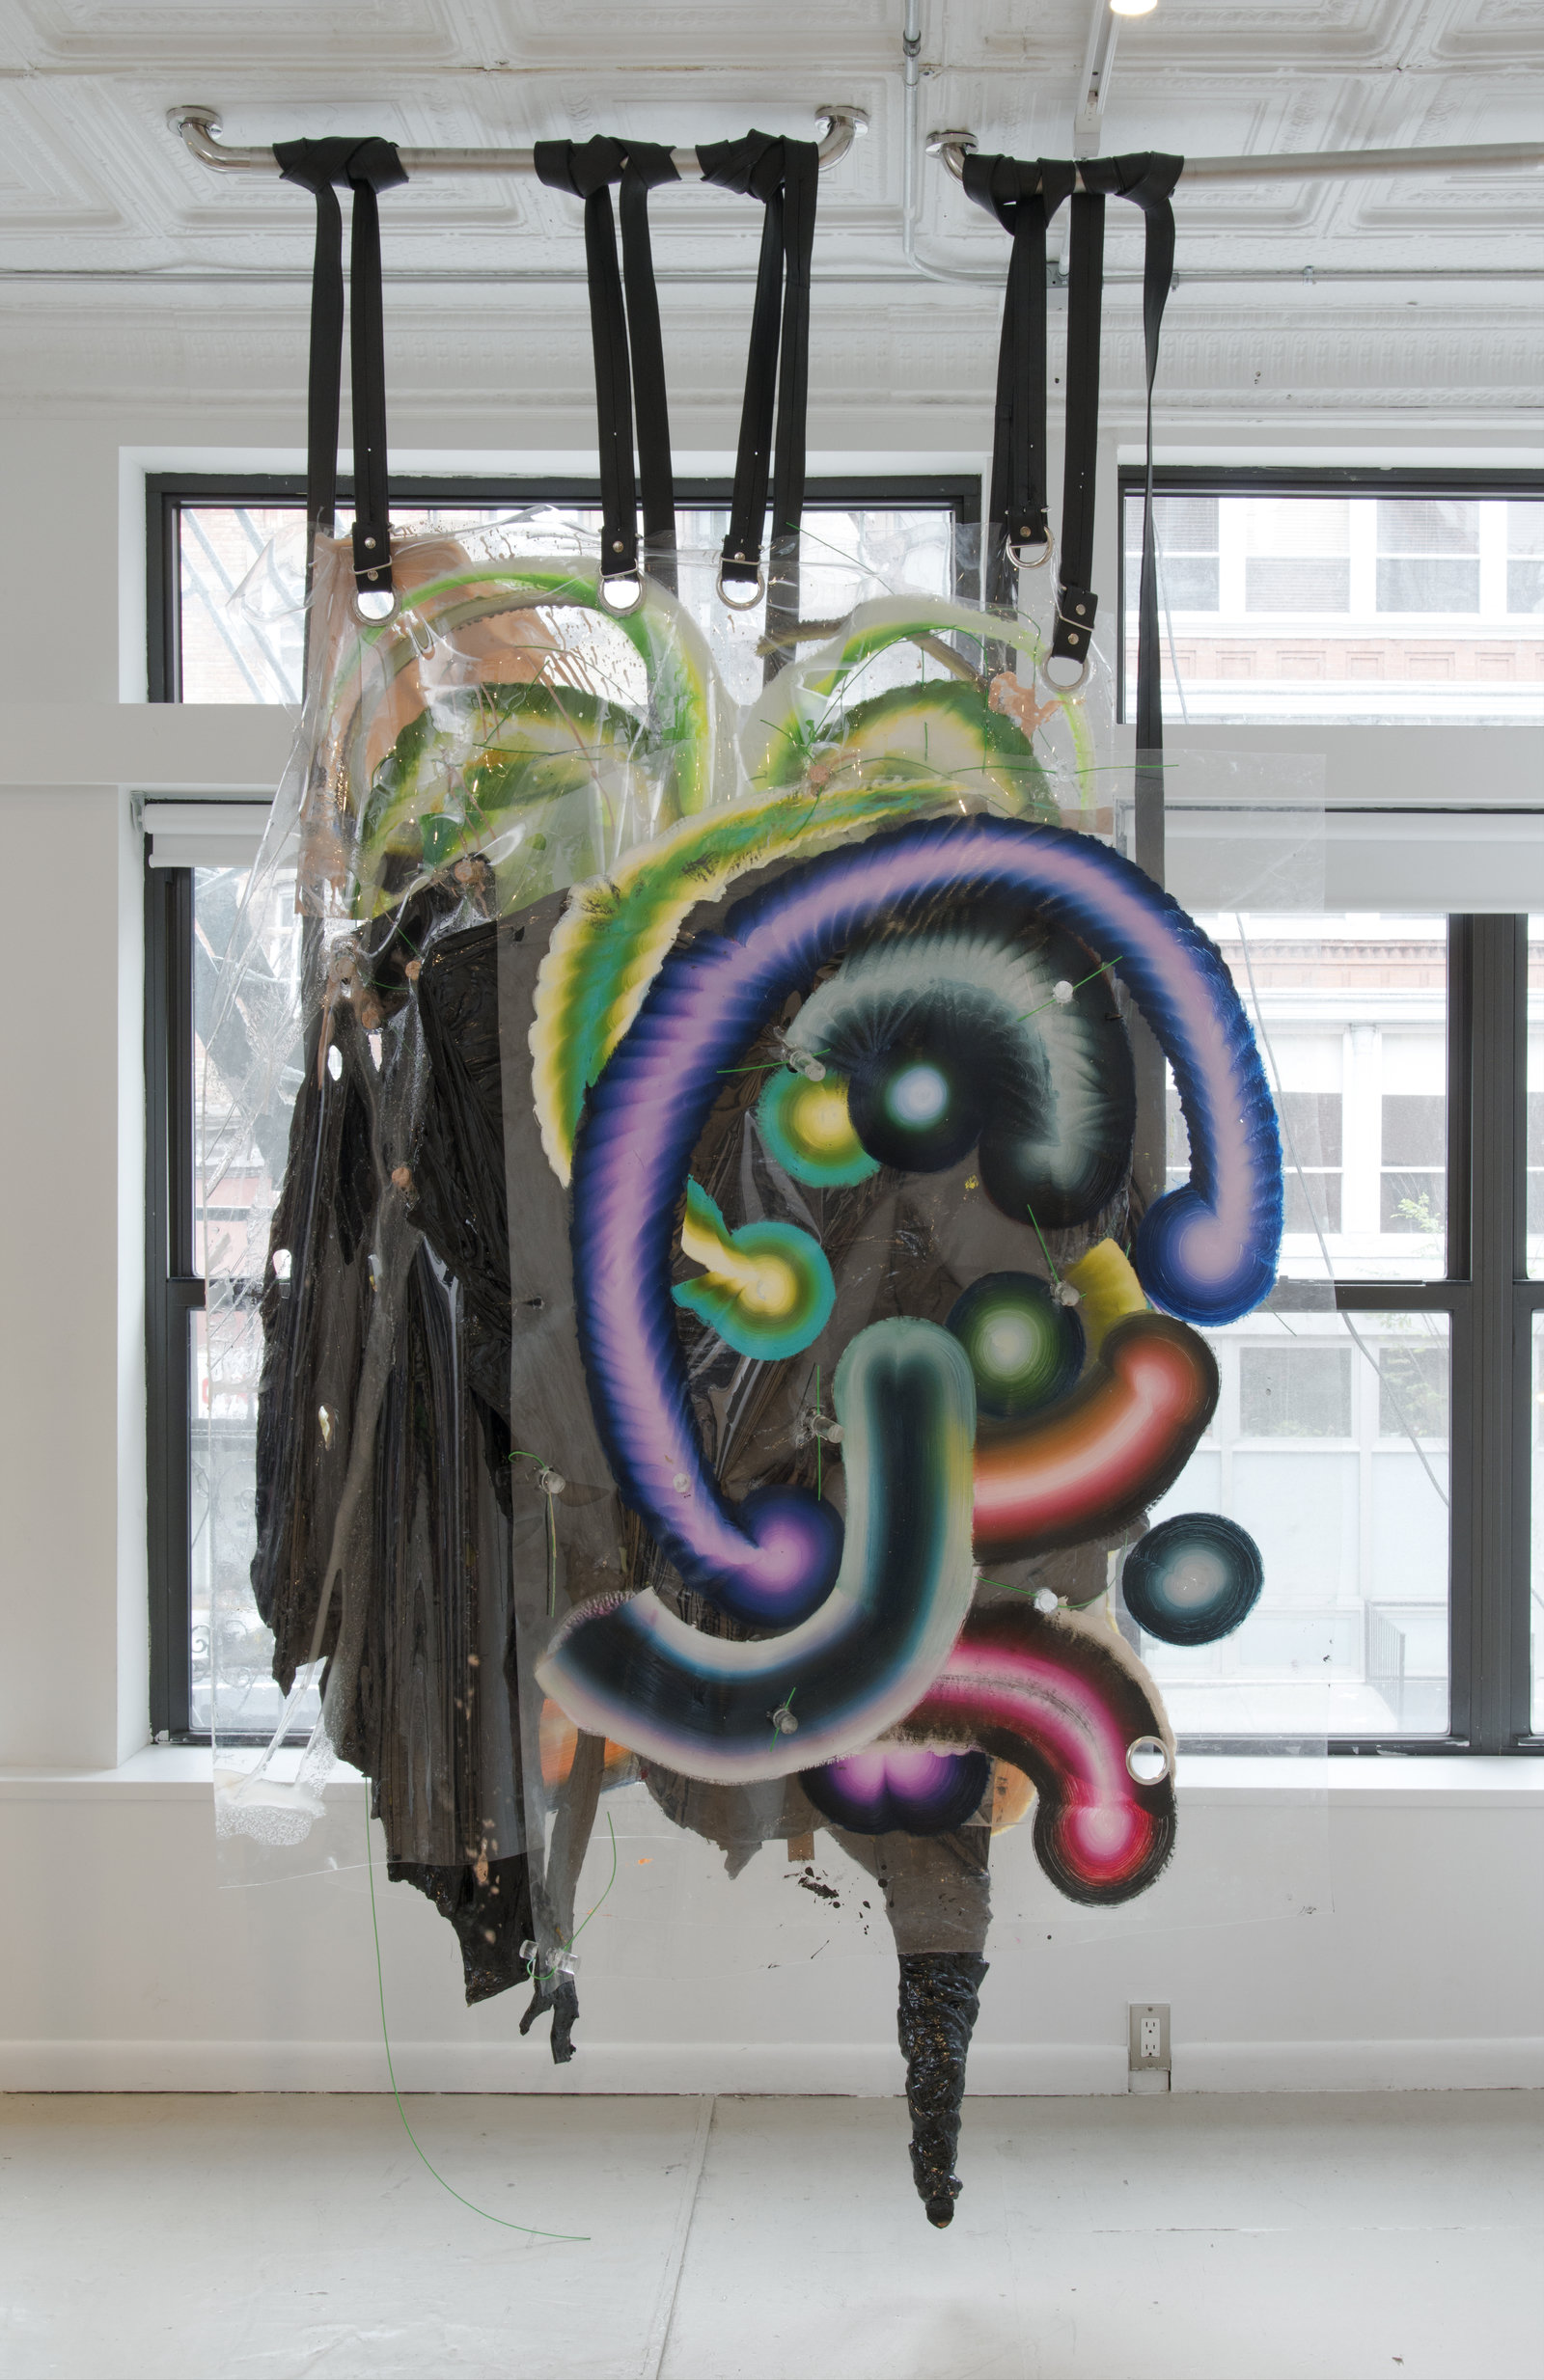 Kerstin Brätsch and Debo Eilers, S is for Sissy, 2013, Bodybag Meo, installation view KAYA III, 47 Canal